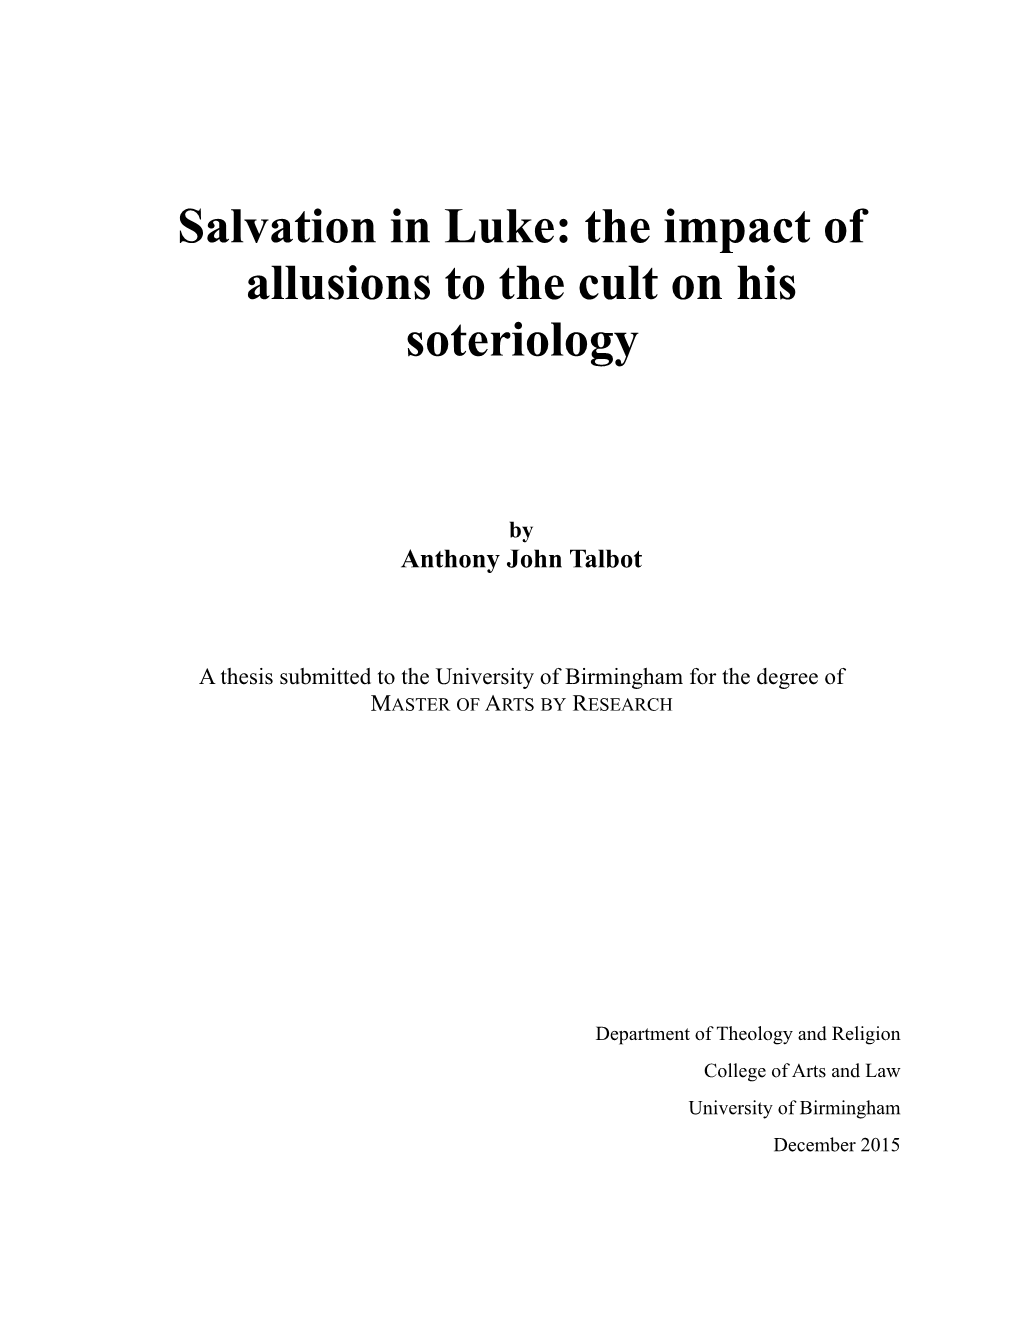 Salvation in Luke: the Impact of Allusions to the Cult on His Soteriology